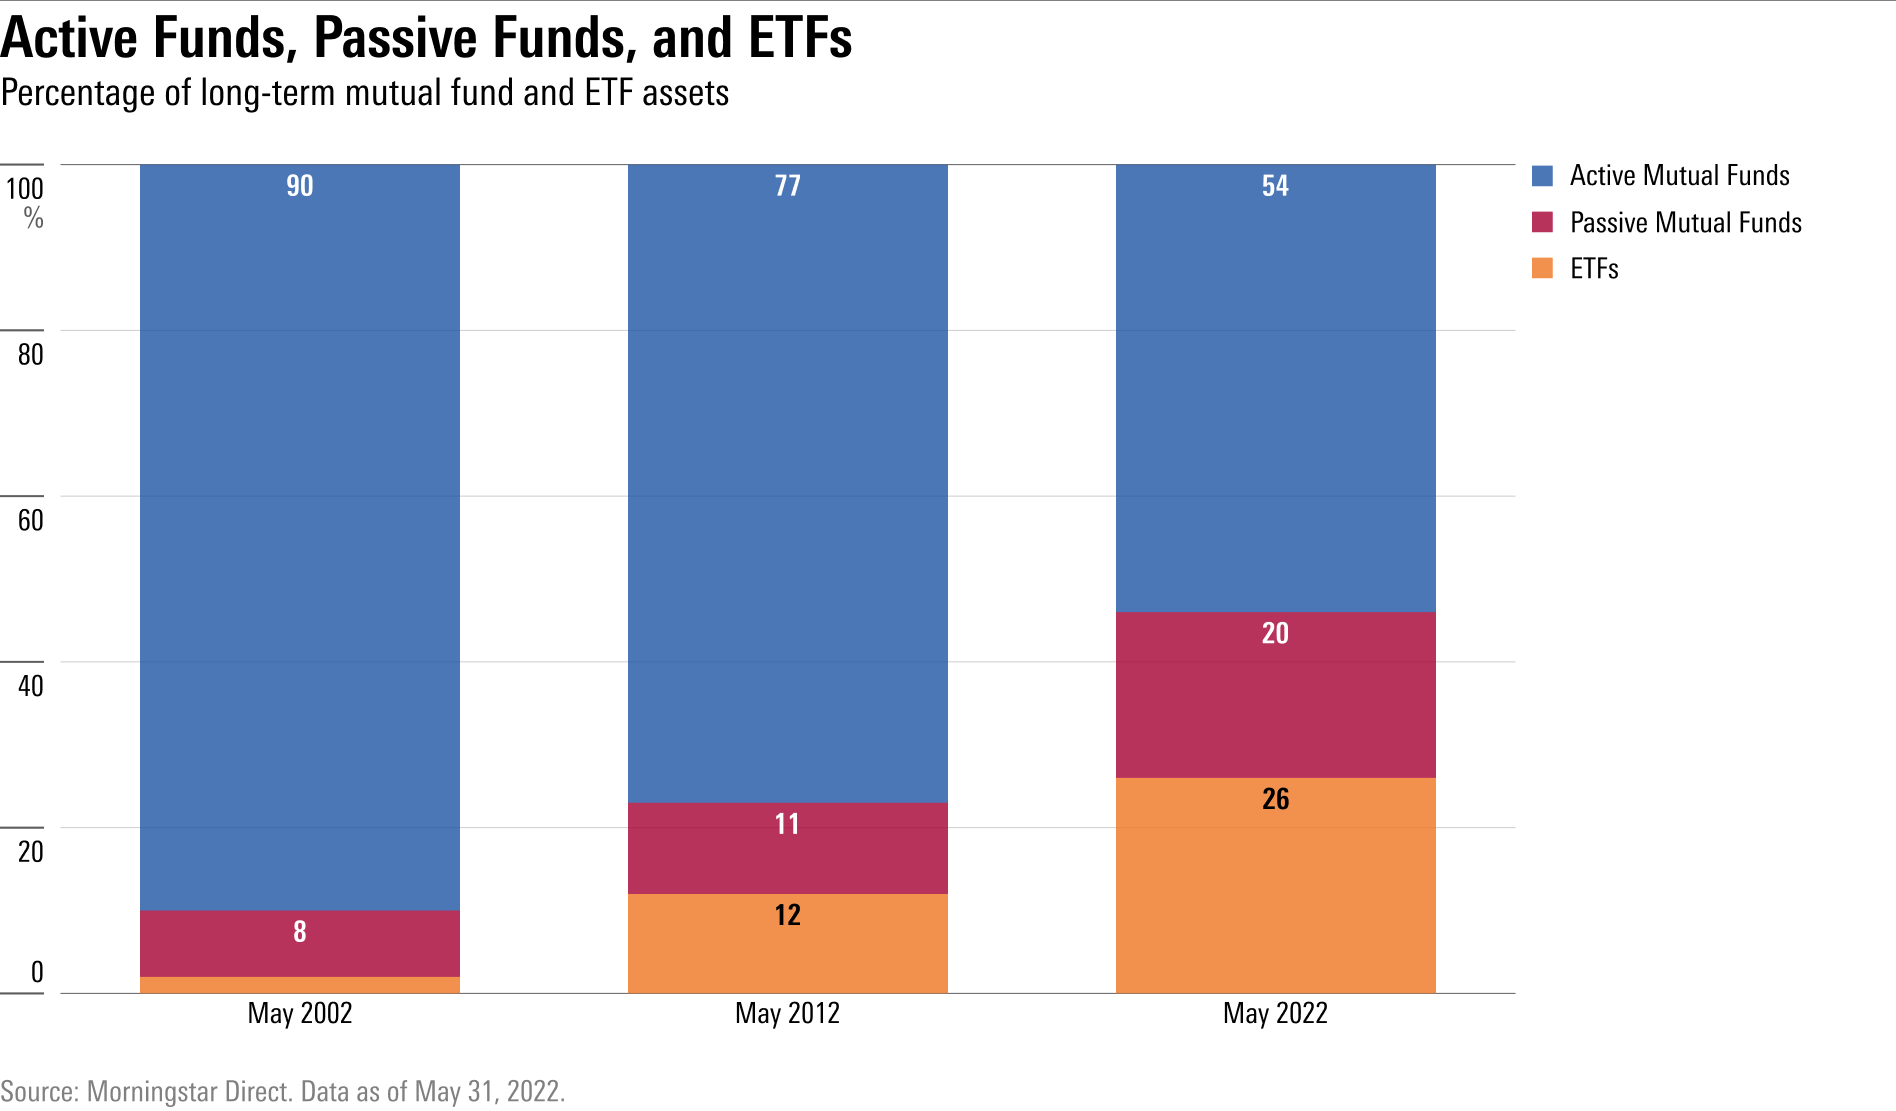 The market share of active mutual funds, passive mutual funds, and ETFs in May 2002, May 2012, and May 2022.